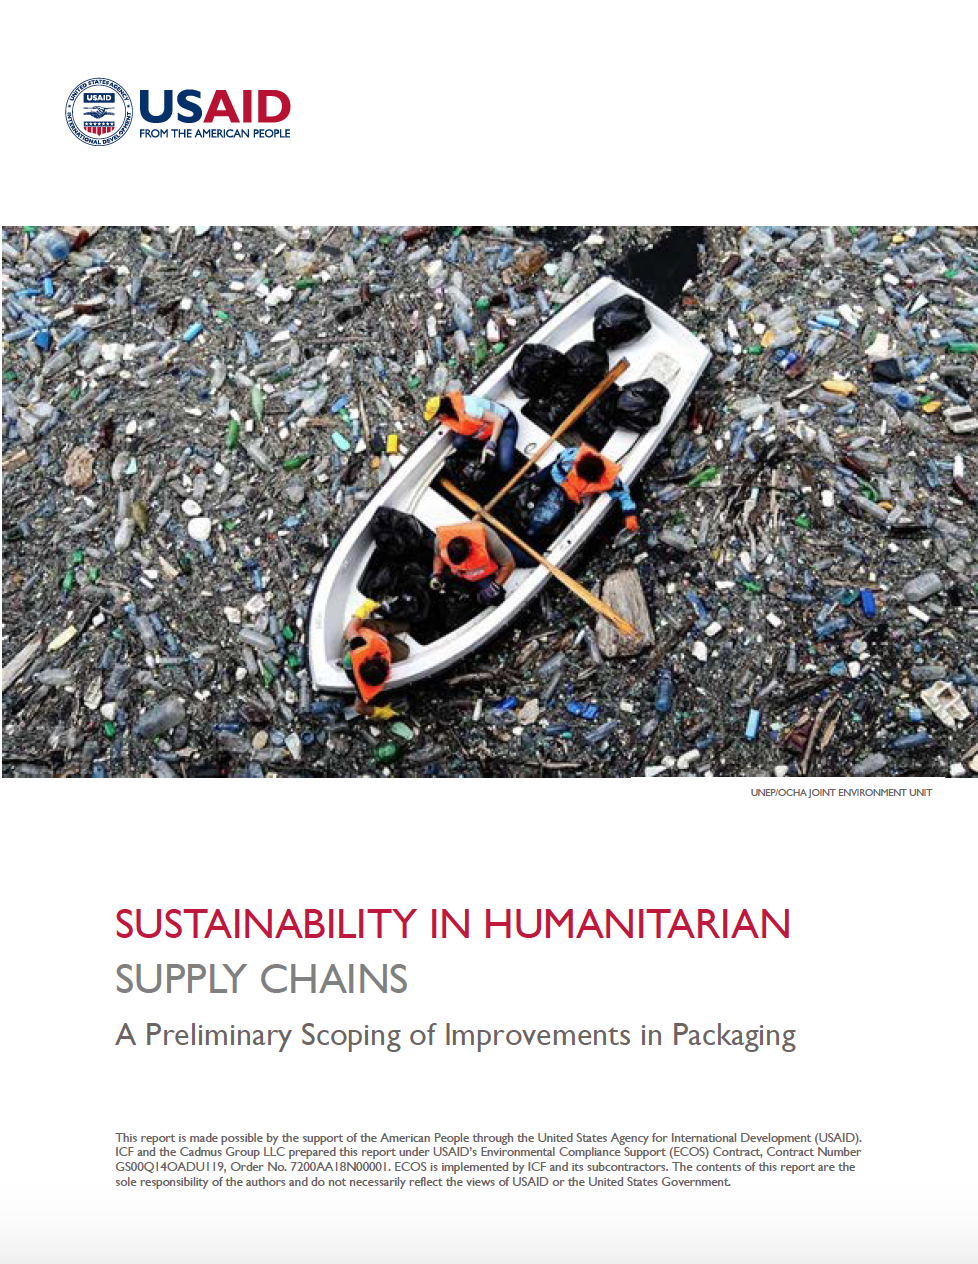 Sustainability in Humanitarian Supply Chains: A Preliminary Scoping of Improvements in Packaging Waste Management